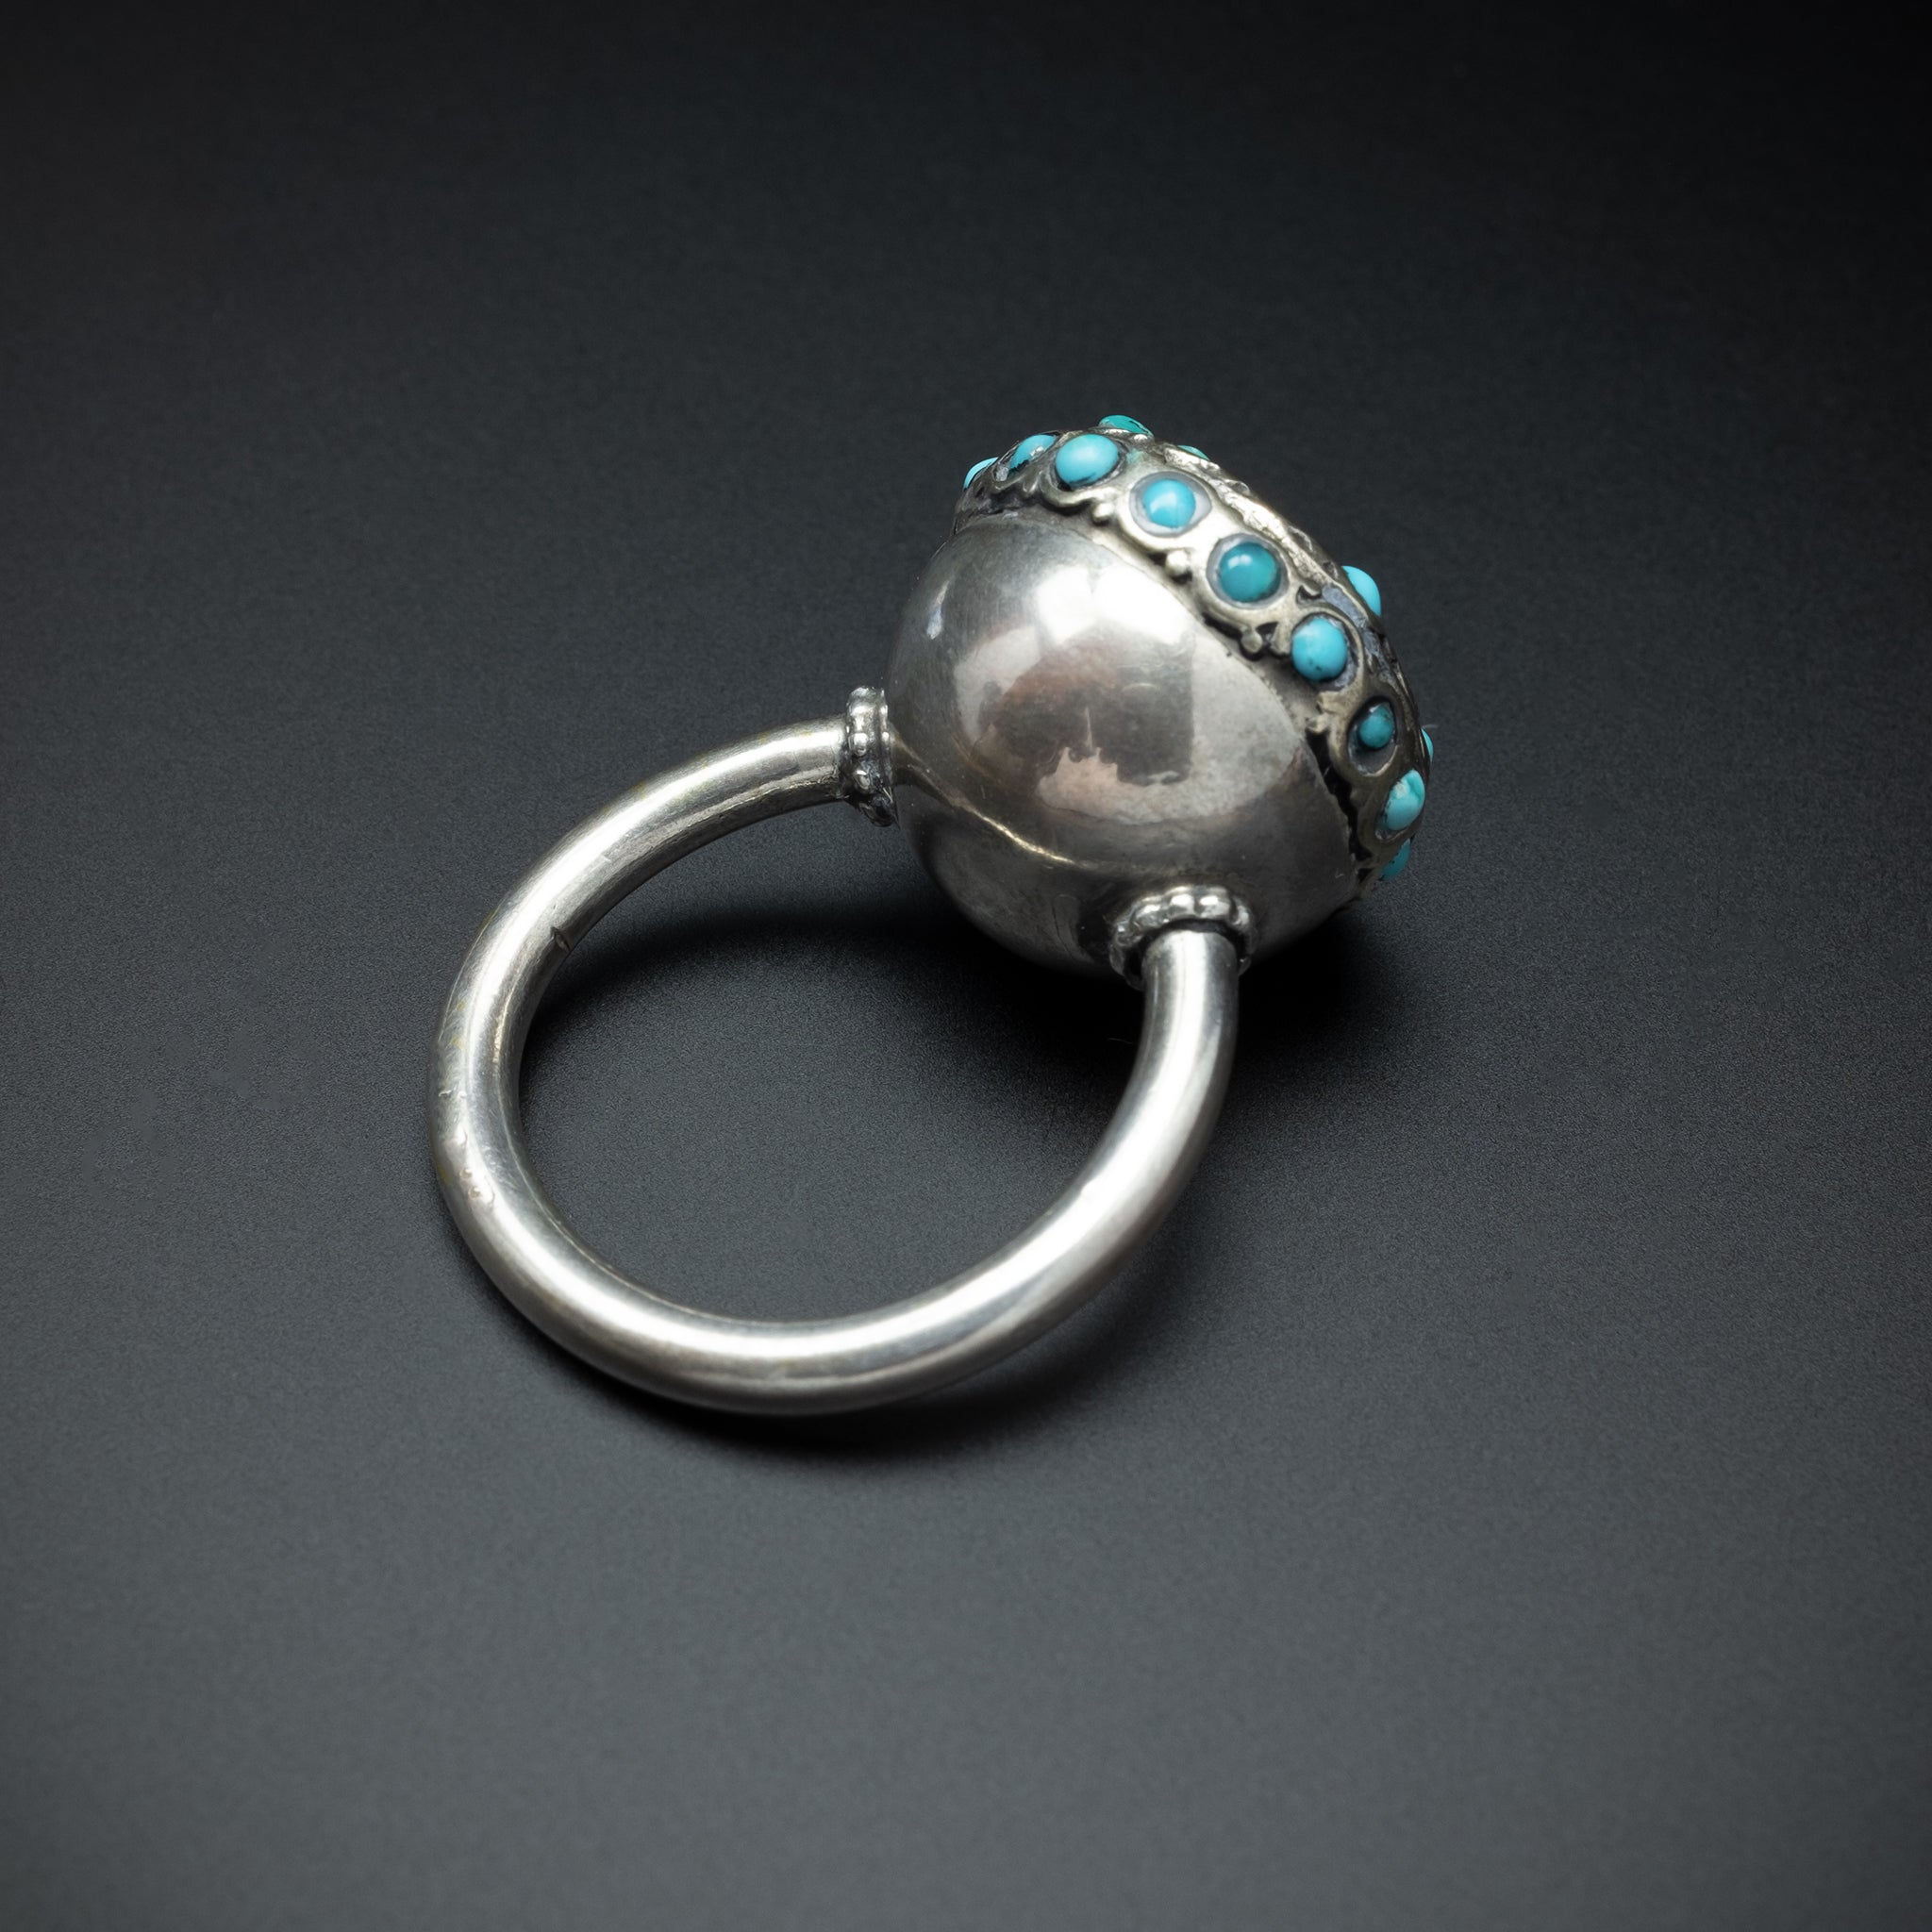 Vintage Silver and turquoise Ring